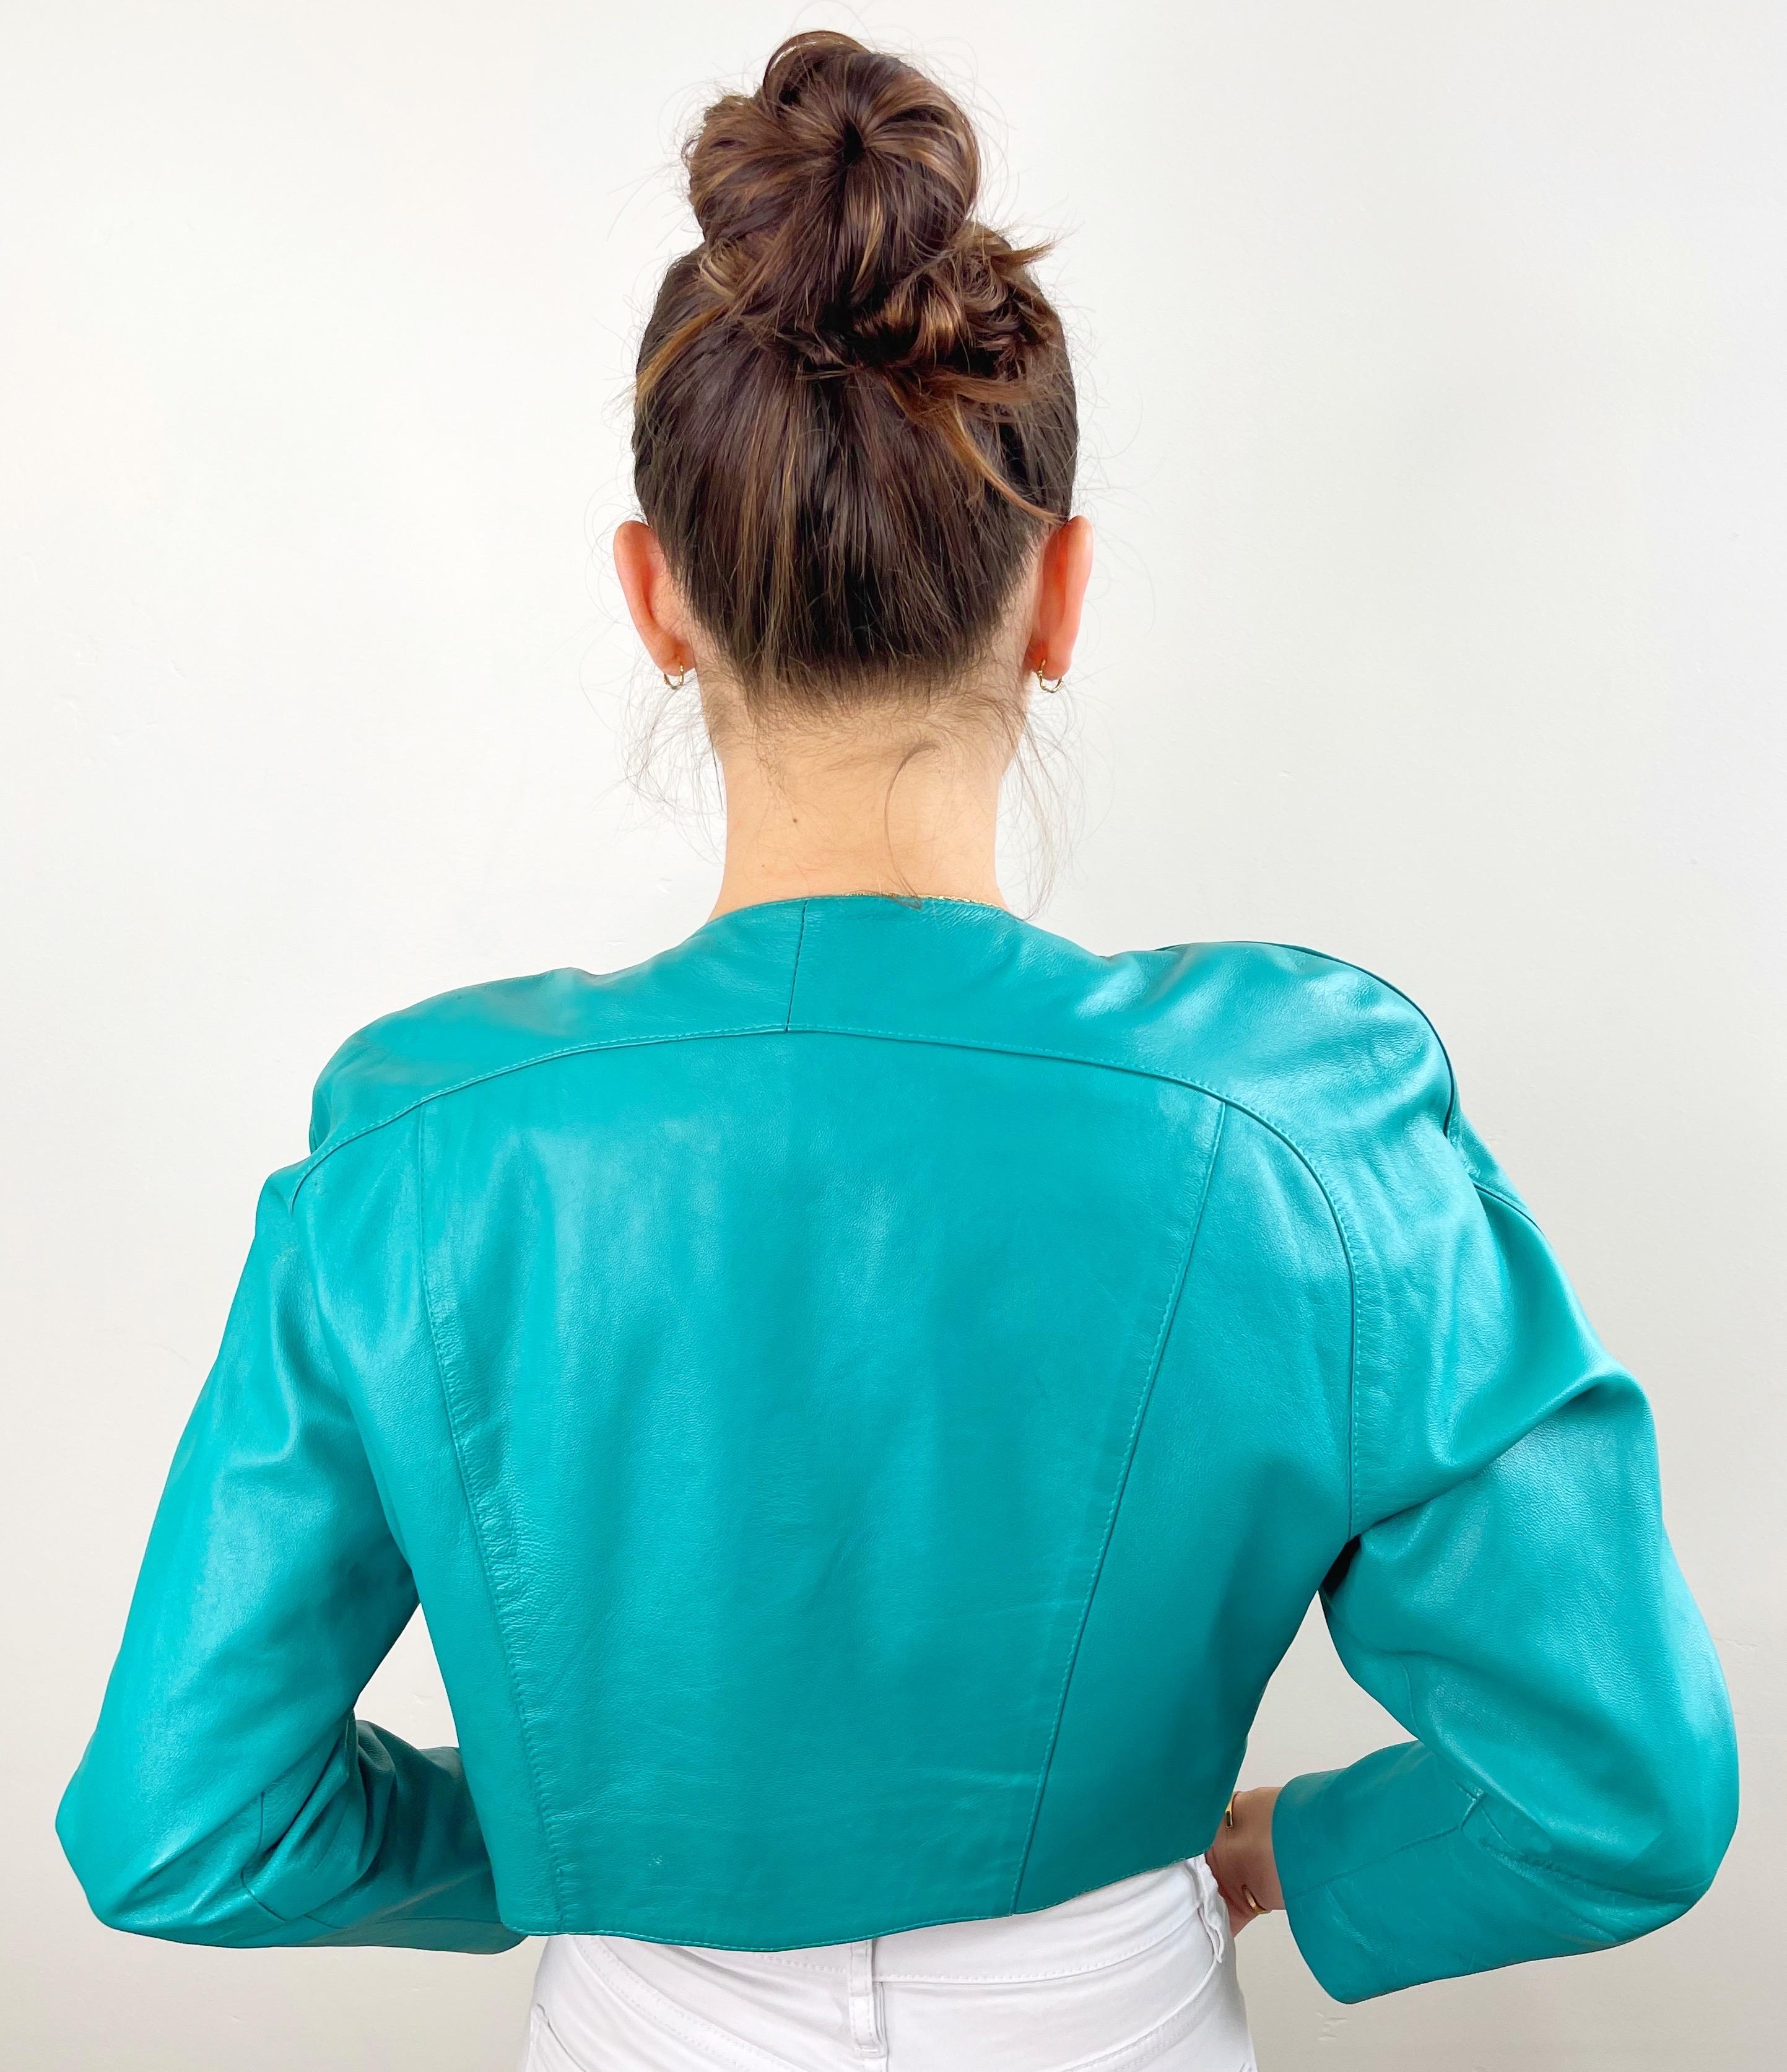 Amazing 1980s Teal Turquoise Leather Vintage 80s Cropped Bolero Jacket Medium In Excellent Condition For Sale In San Diego, CA